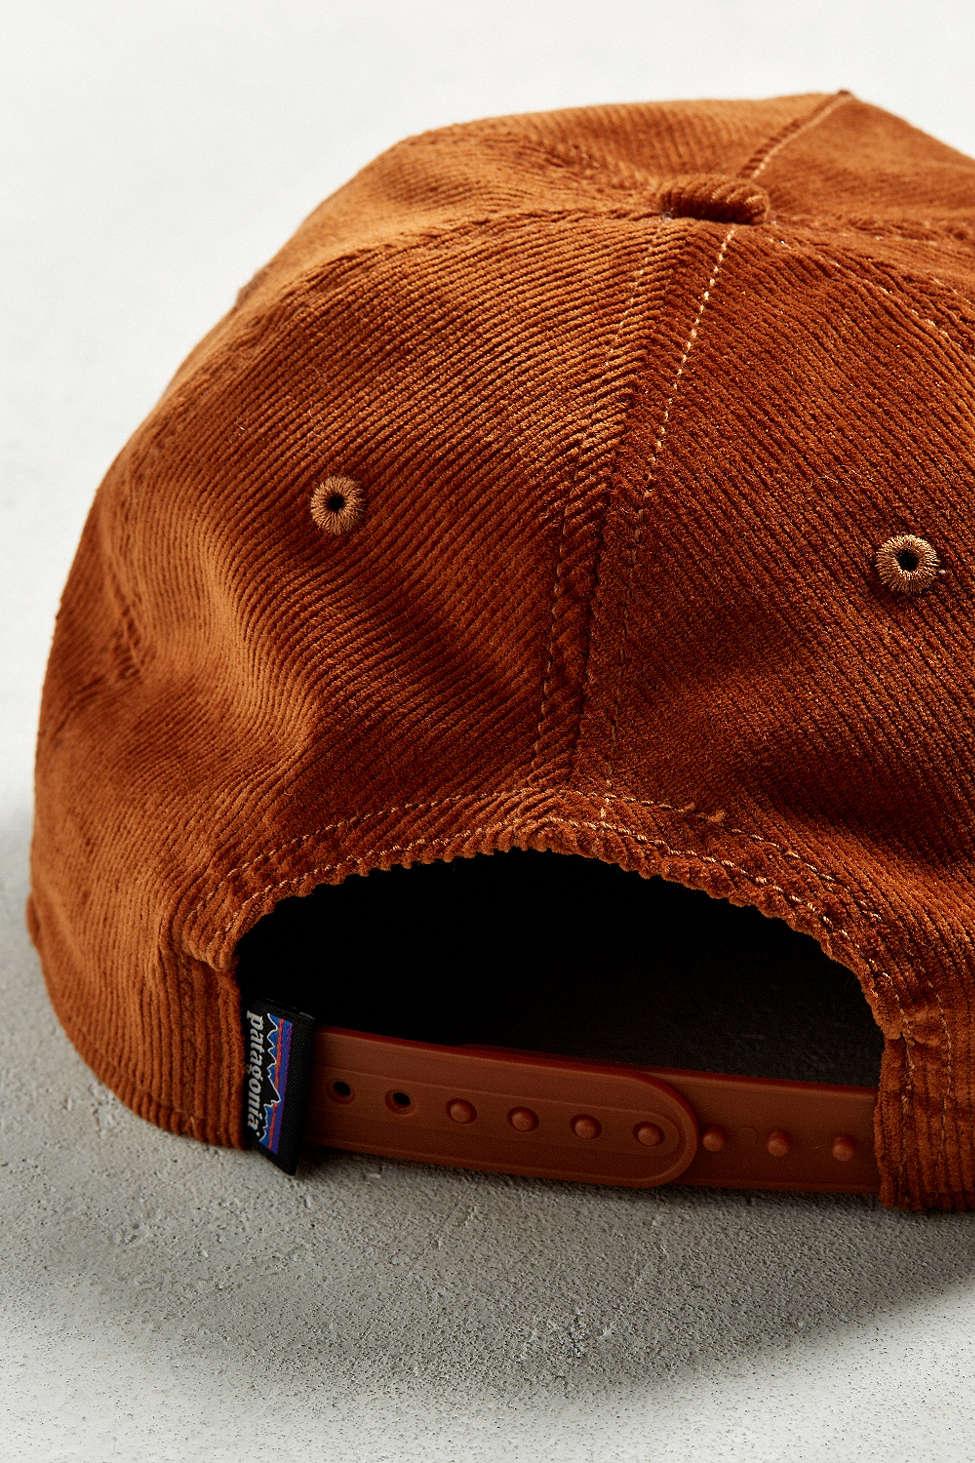 Patagonia Seazy Breezy Corduroy Hat in Brown for Men